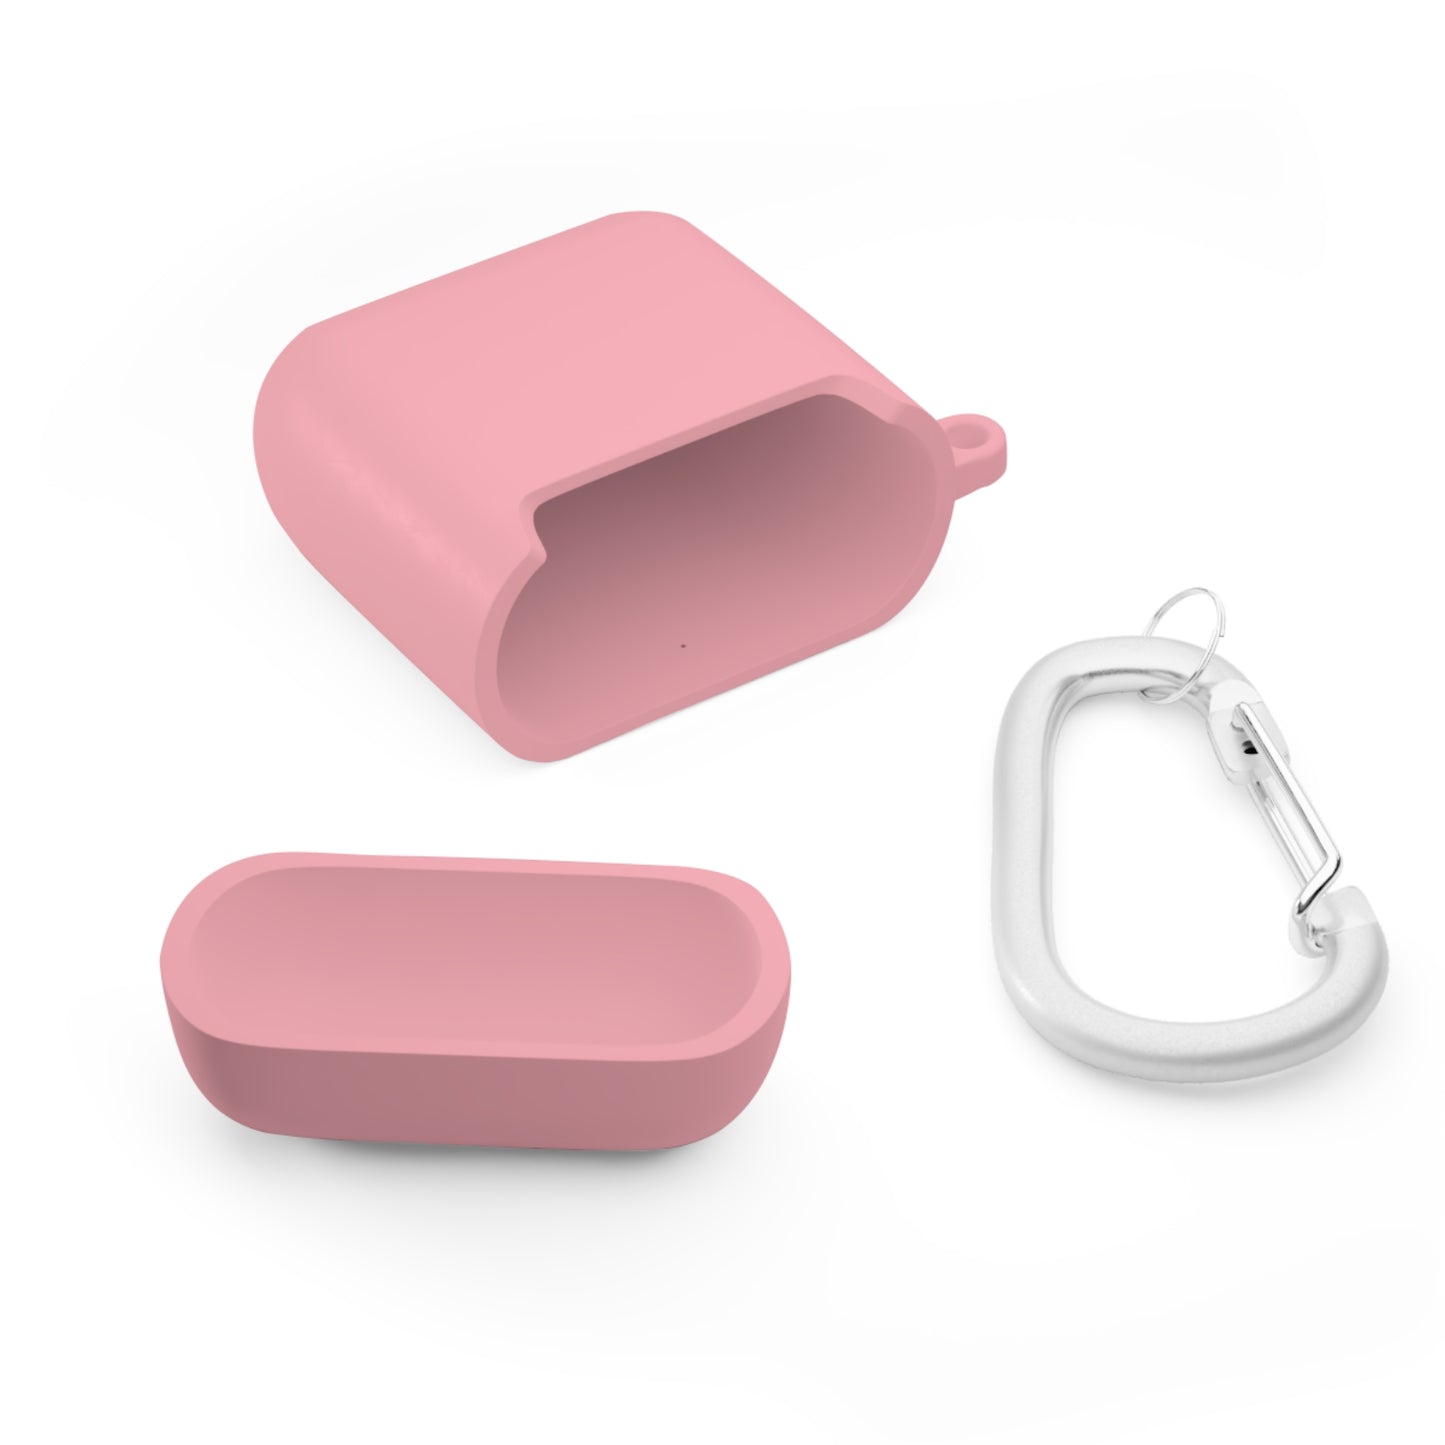 AirPods / AirPods Pro Case Cover - I Really Hate Working